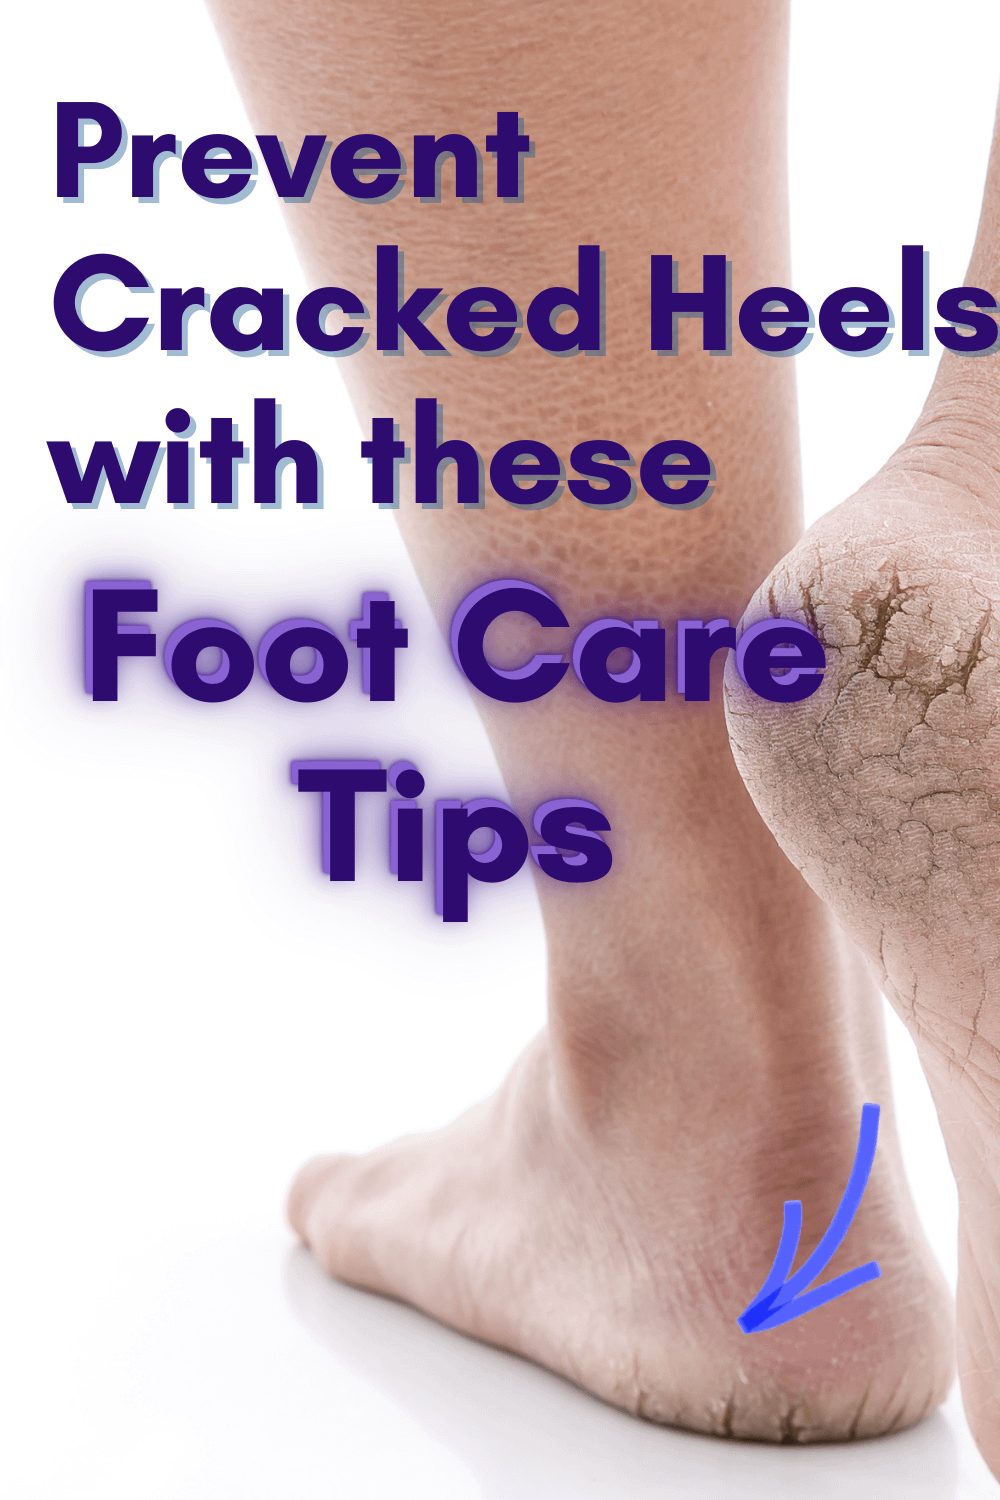 Prevent cracked heels Lots of people protect themselves by purchasing sunscreen, lip protectants and sunglasses. But many will forget to look after two of the most important and neglected parts of the body – the feet.